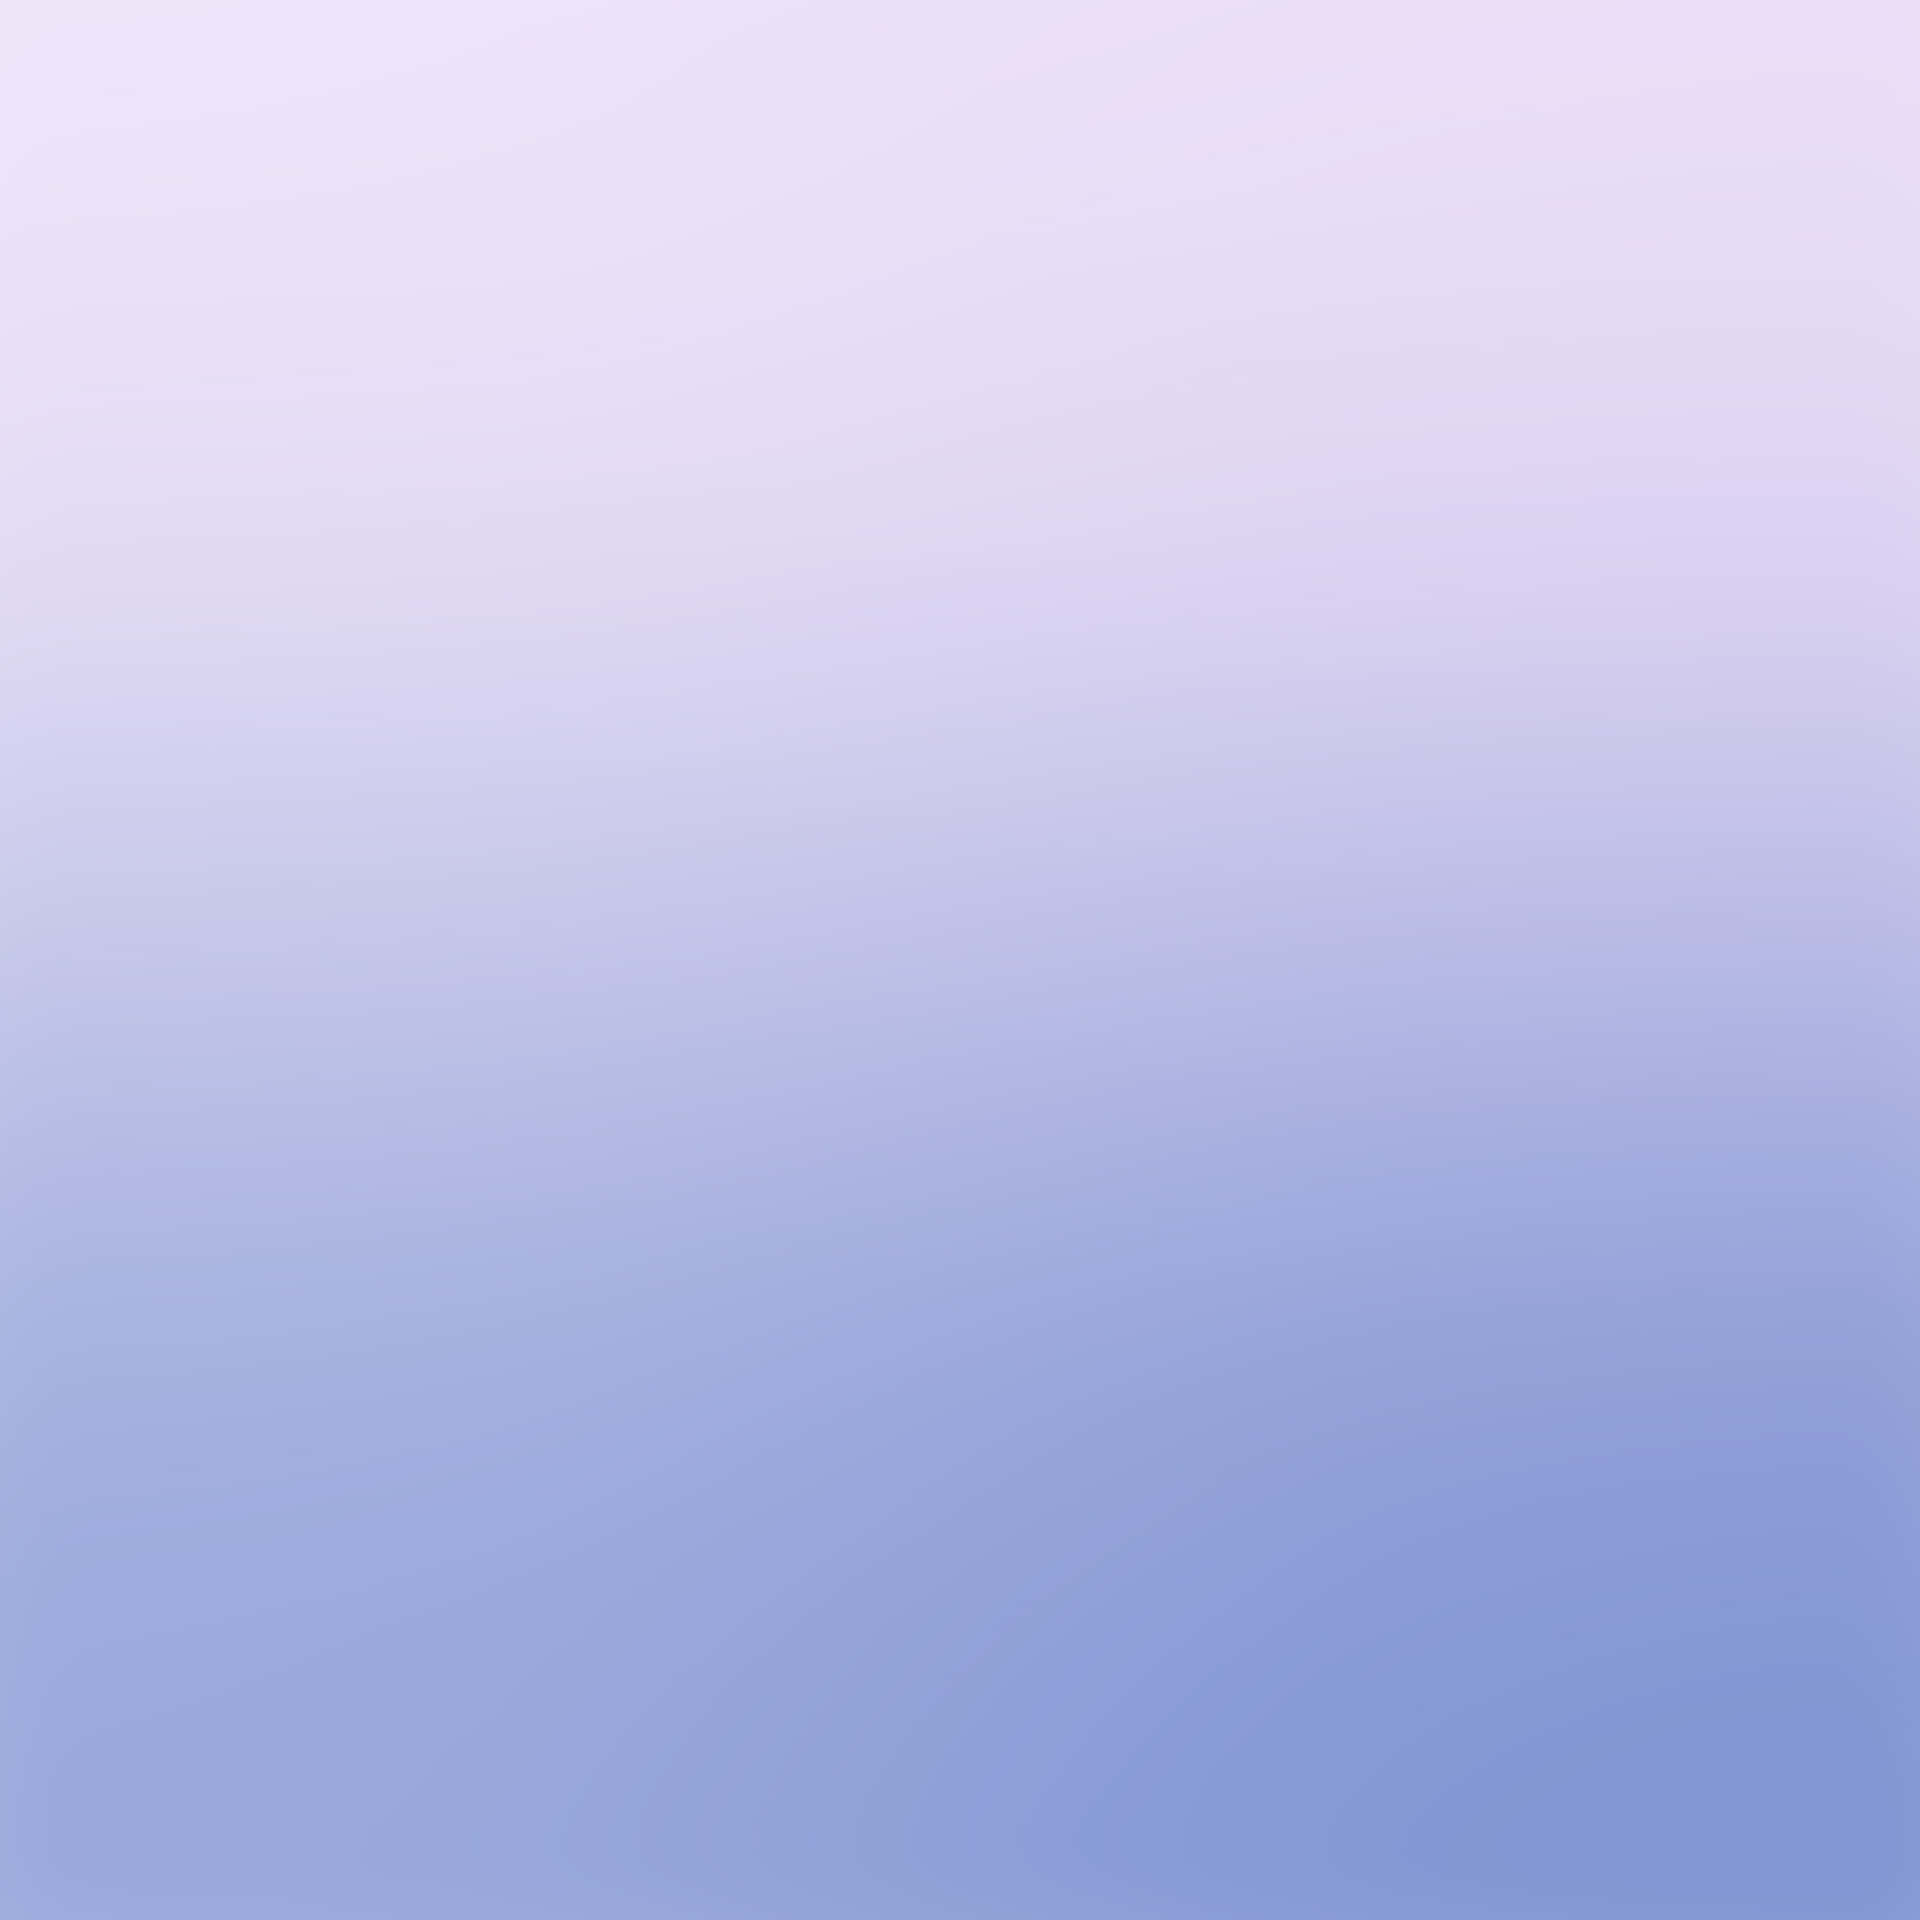 A Blue And Purple Gradient Background Wallpaper